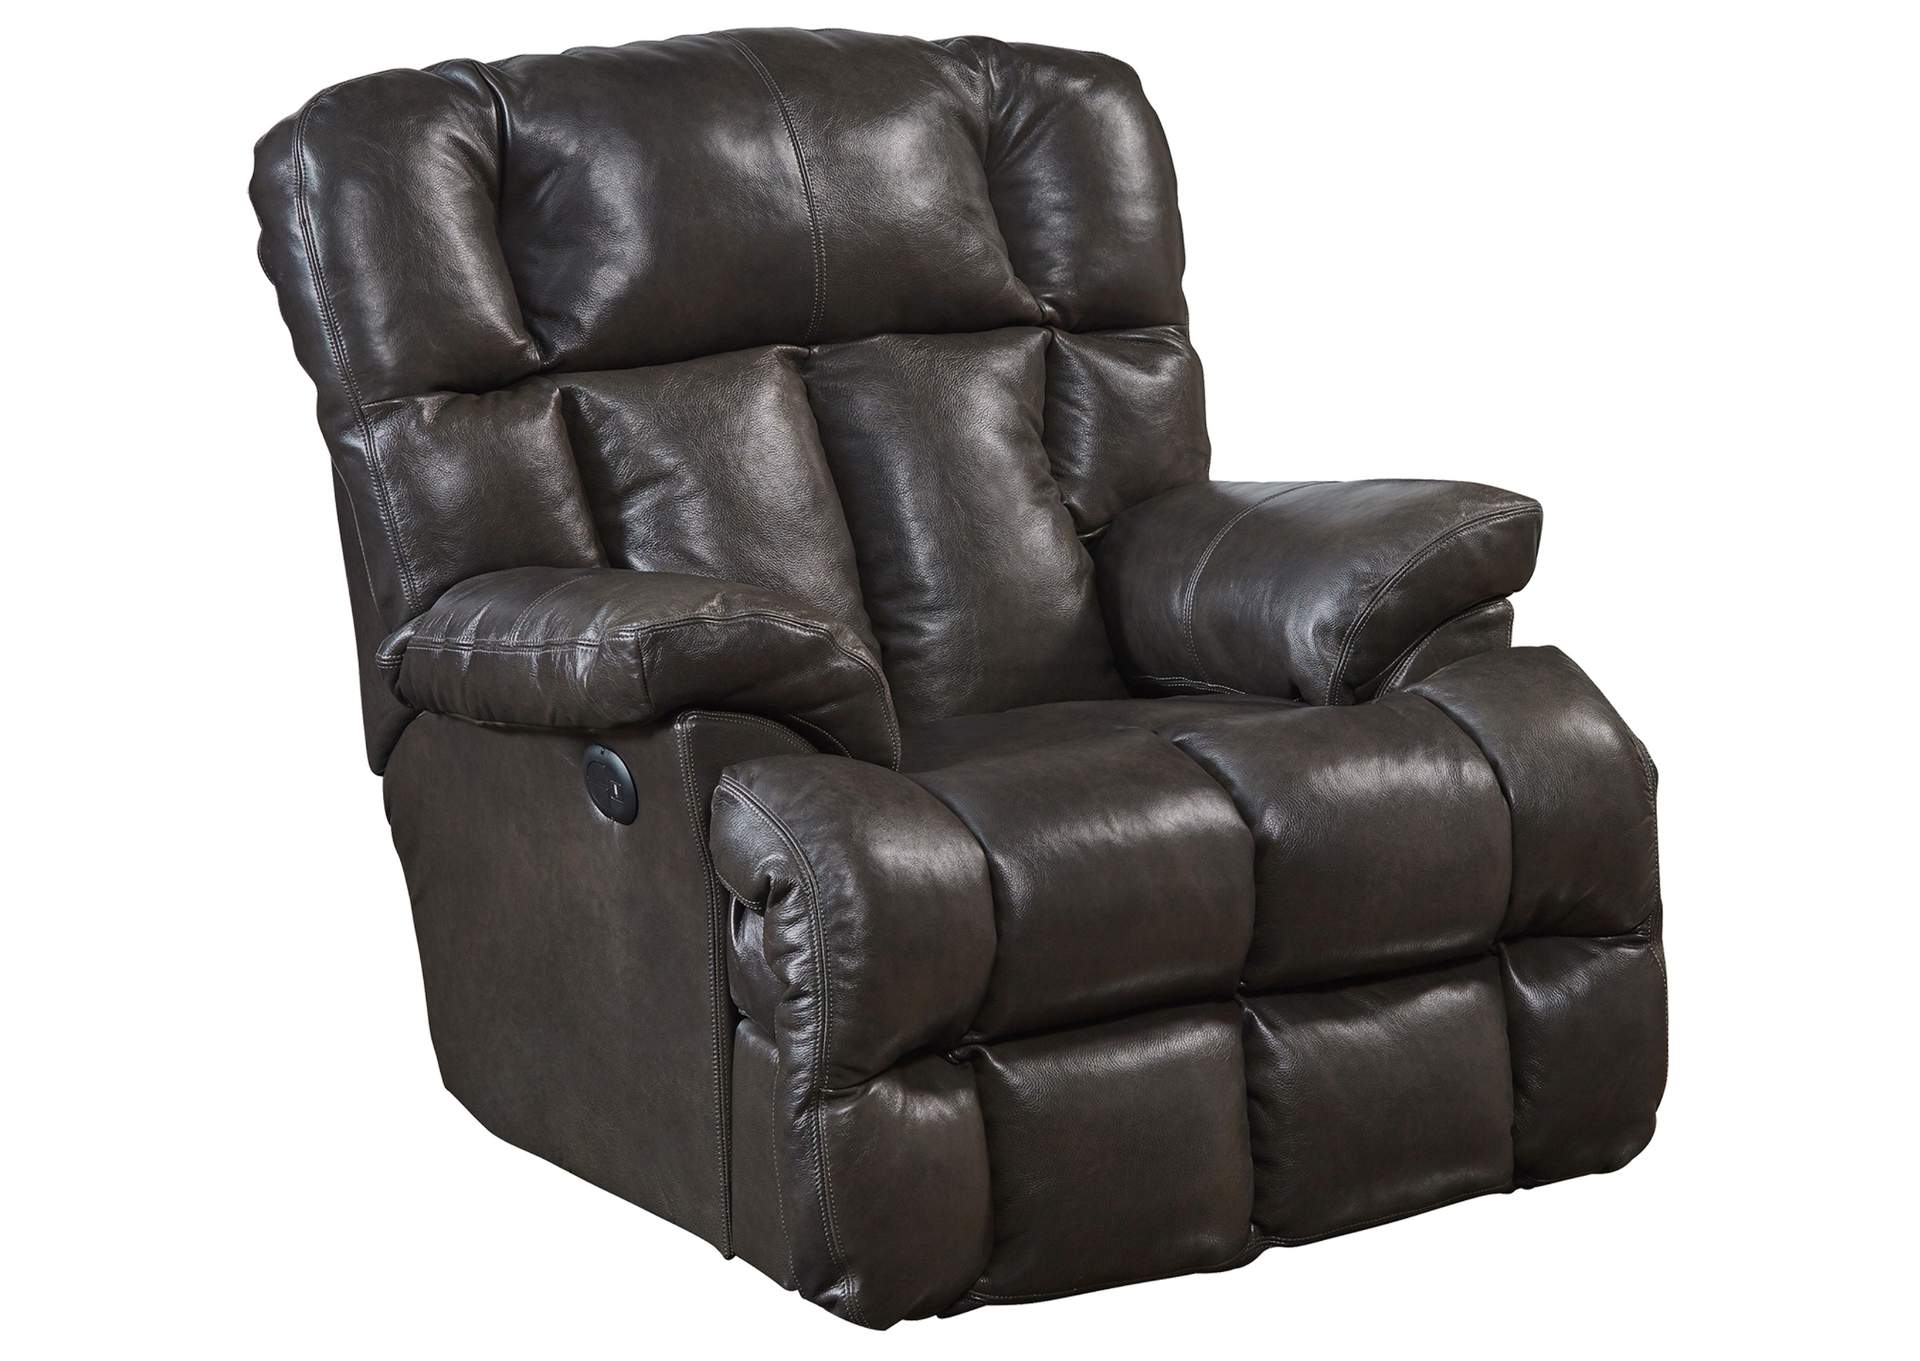 Victor Chocolate Lay Flat Power Recliner,Jackson Catnapper